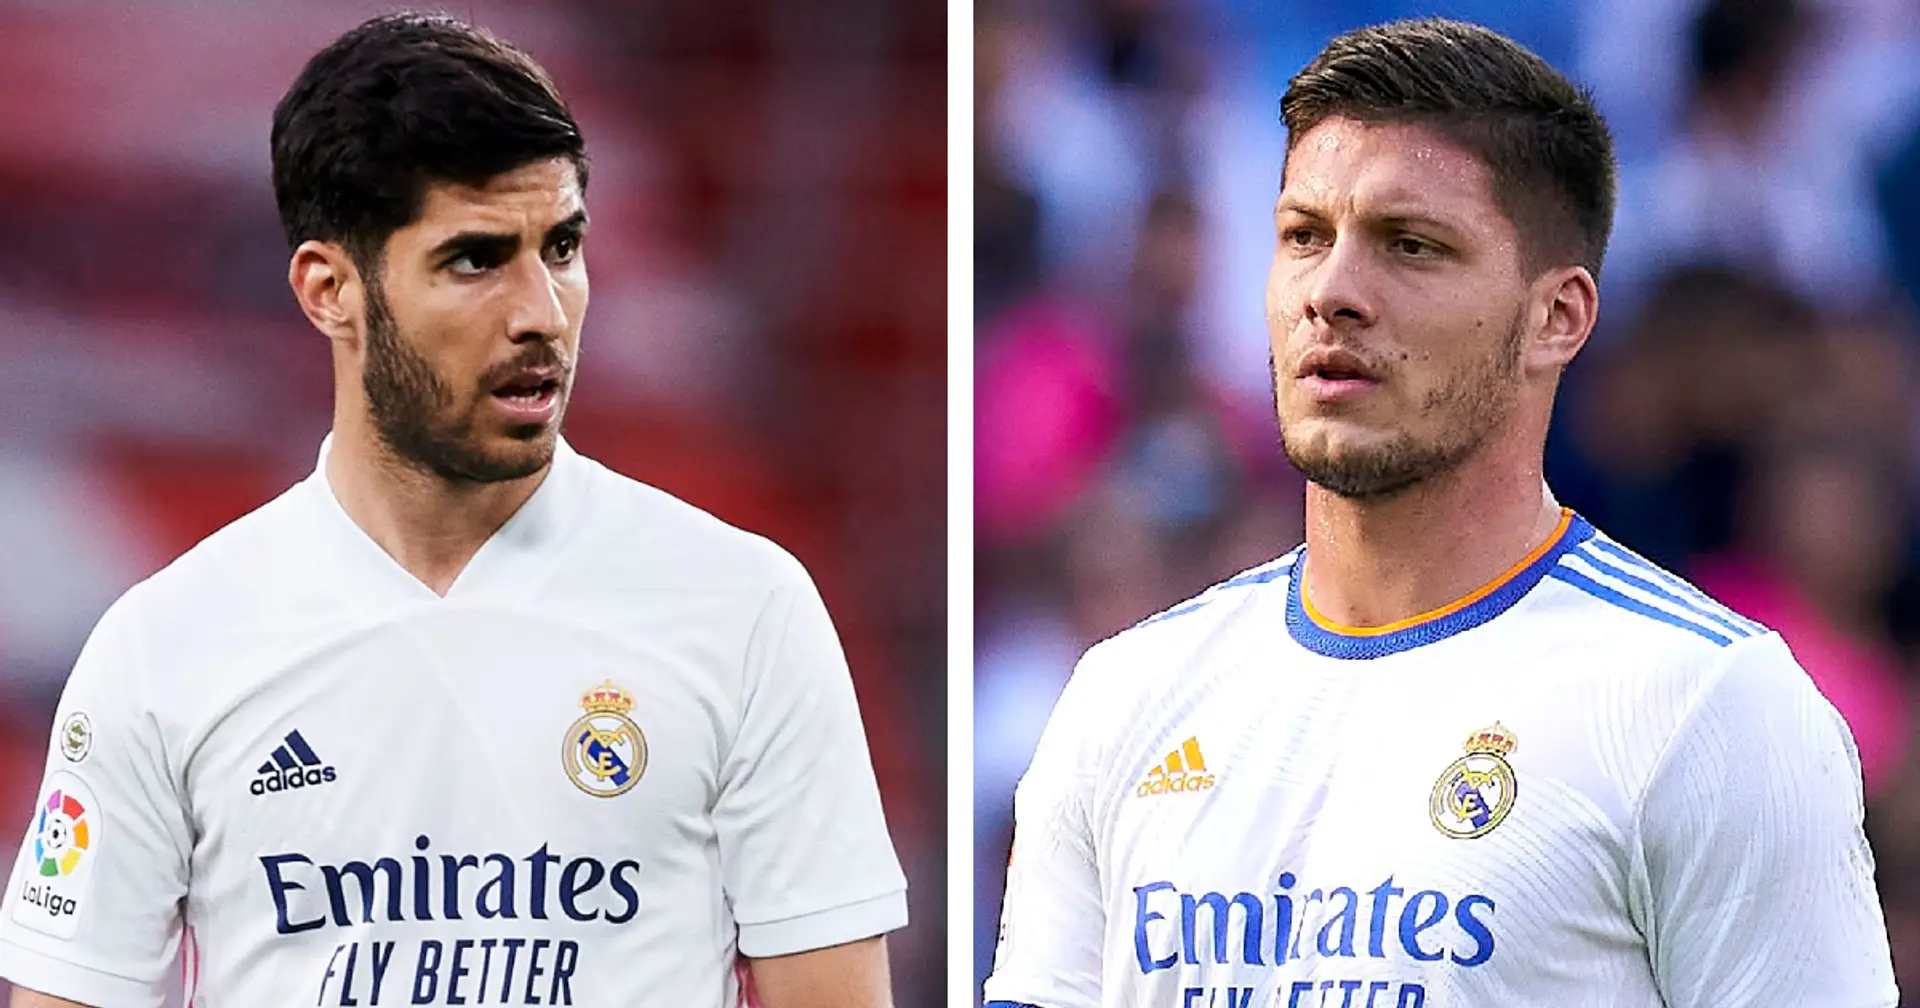 Revealed: 4 players likely to leave Real Madrid in January